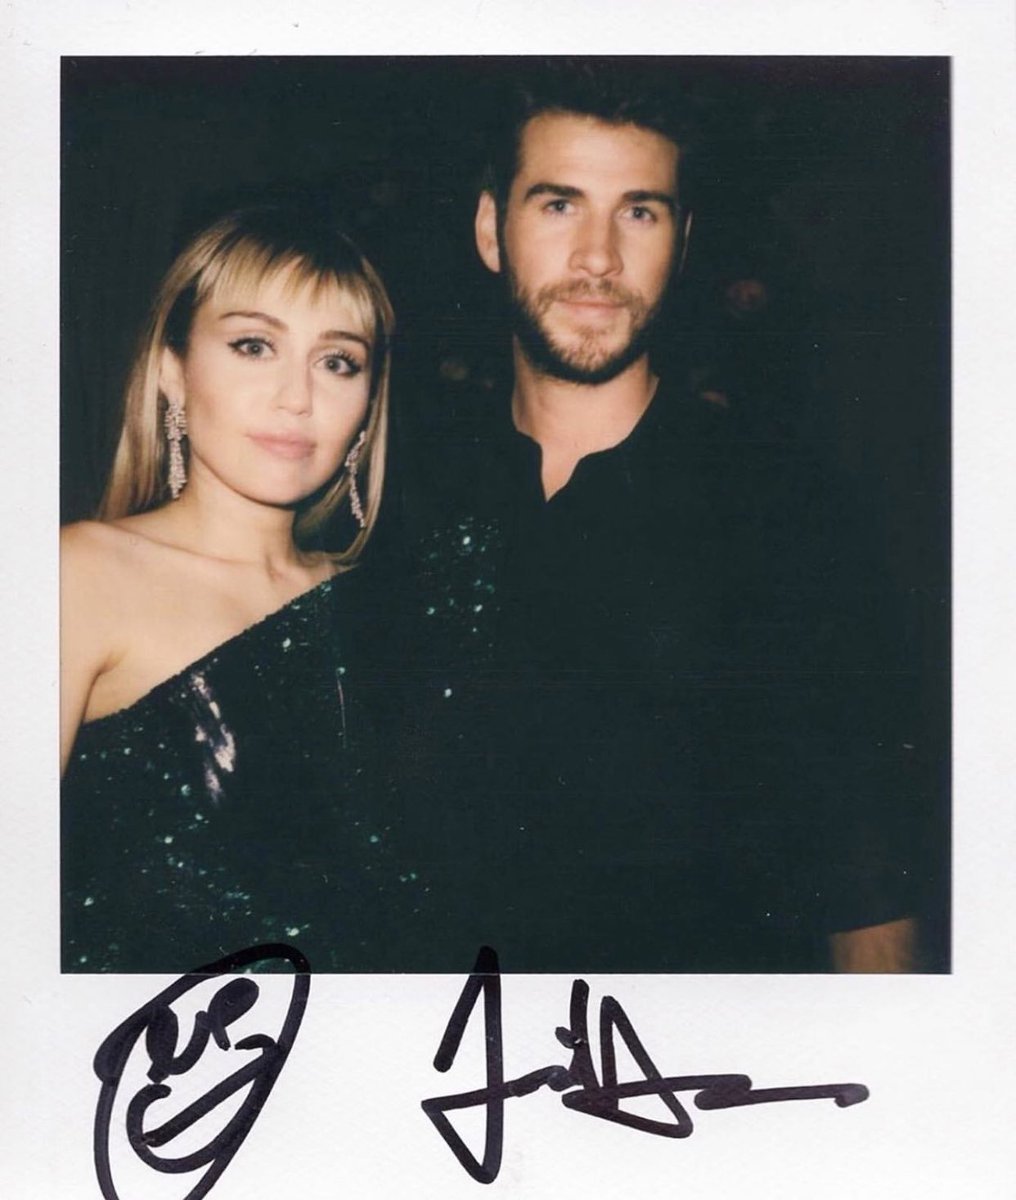 .@liamhemsworth @YSL #anthonyvaccarello https://t.co/a78JfylKYb